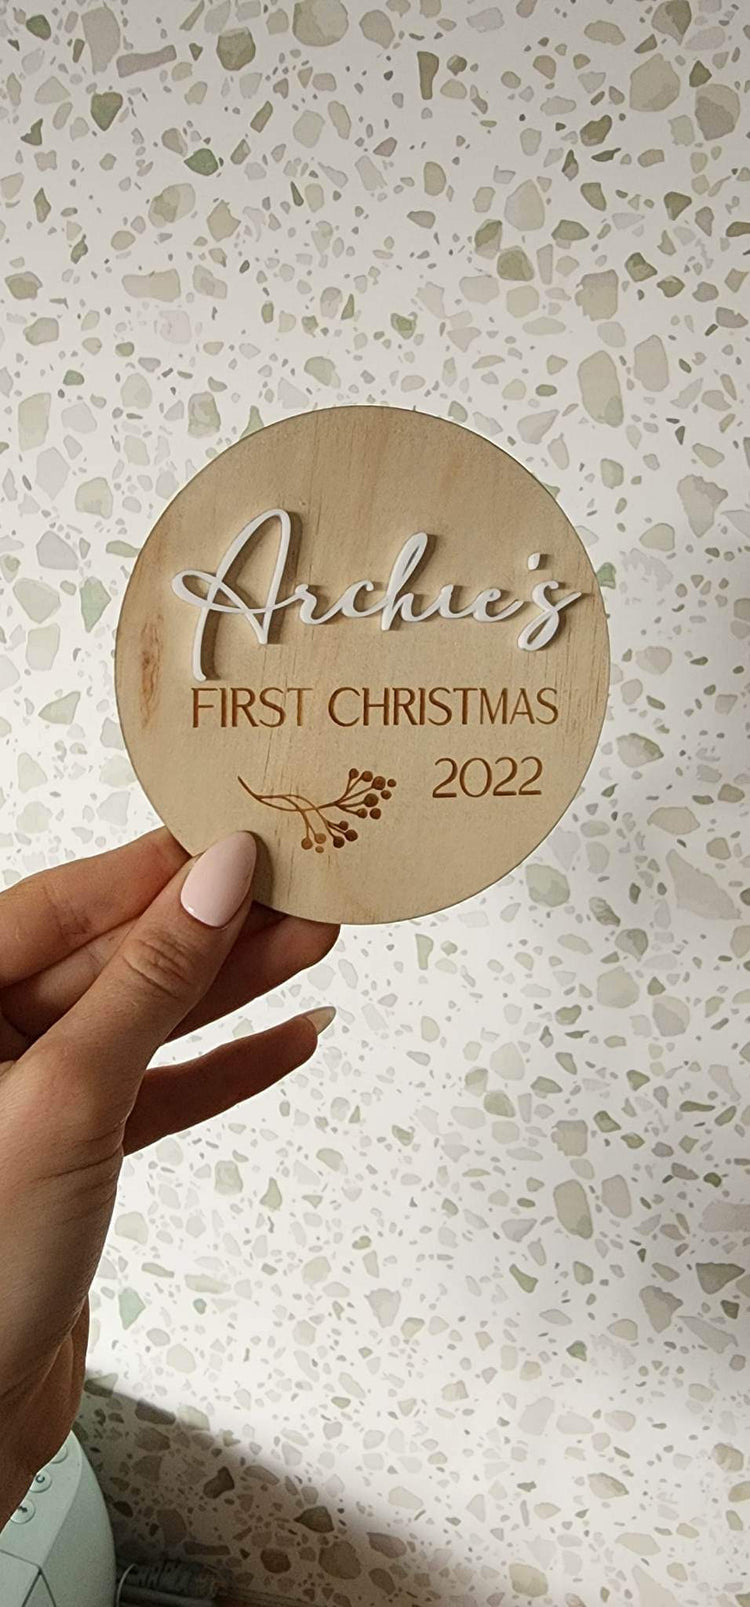 Archie’s First Christmas Plaque